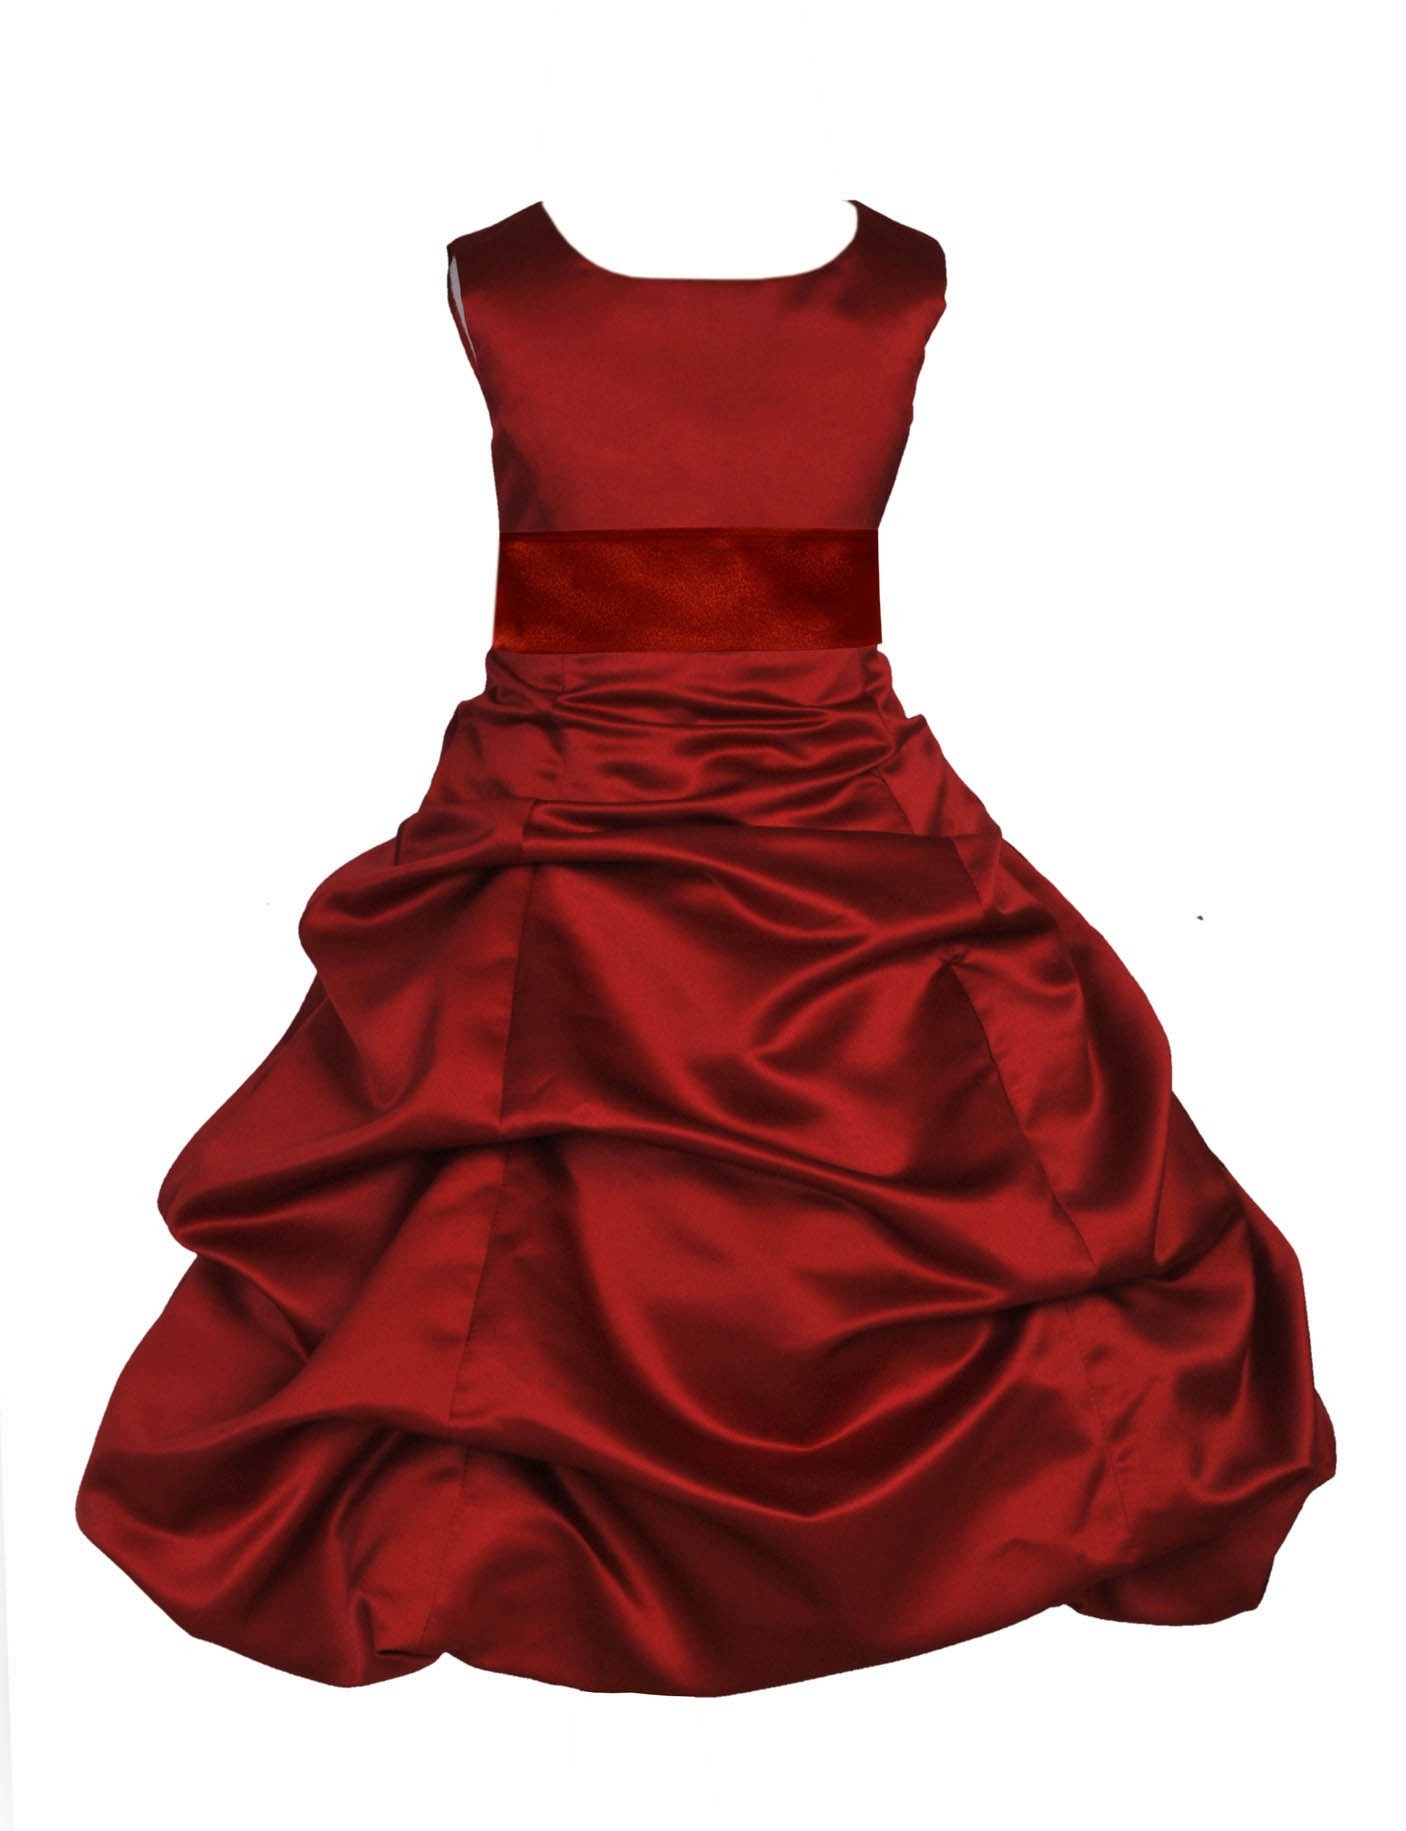 Matching Apple Red Satin Pick-Up Bubble Flower Girl Dress 806S